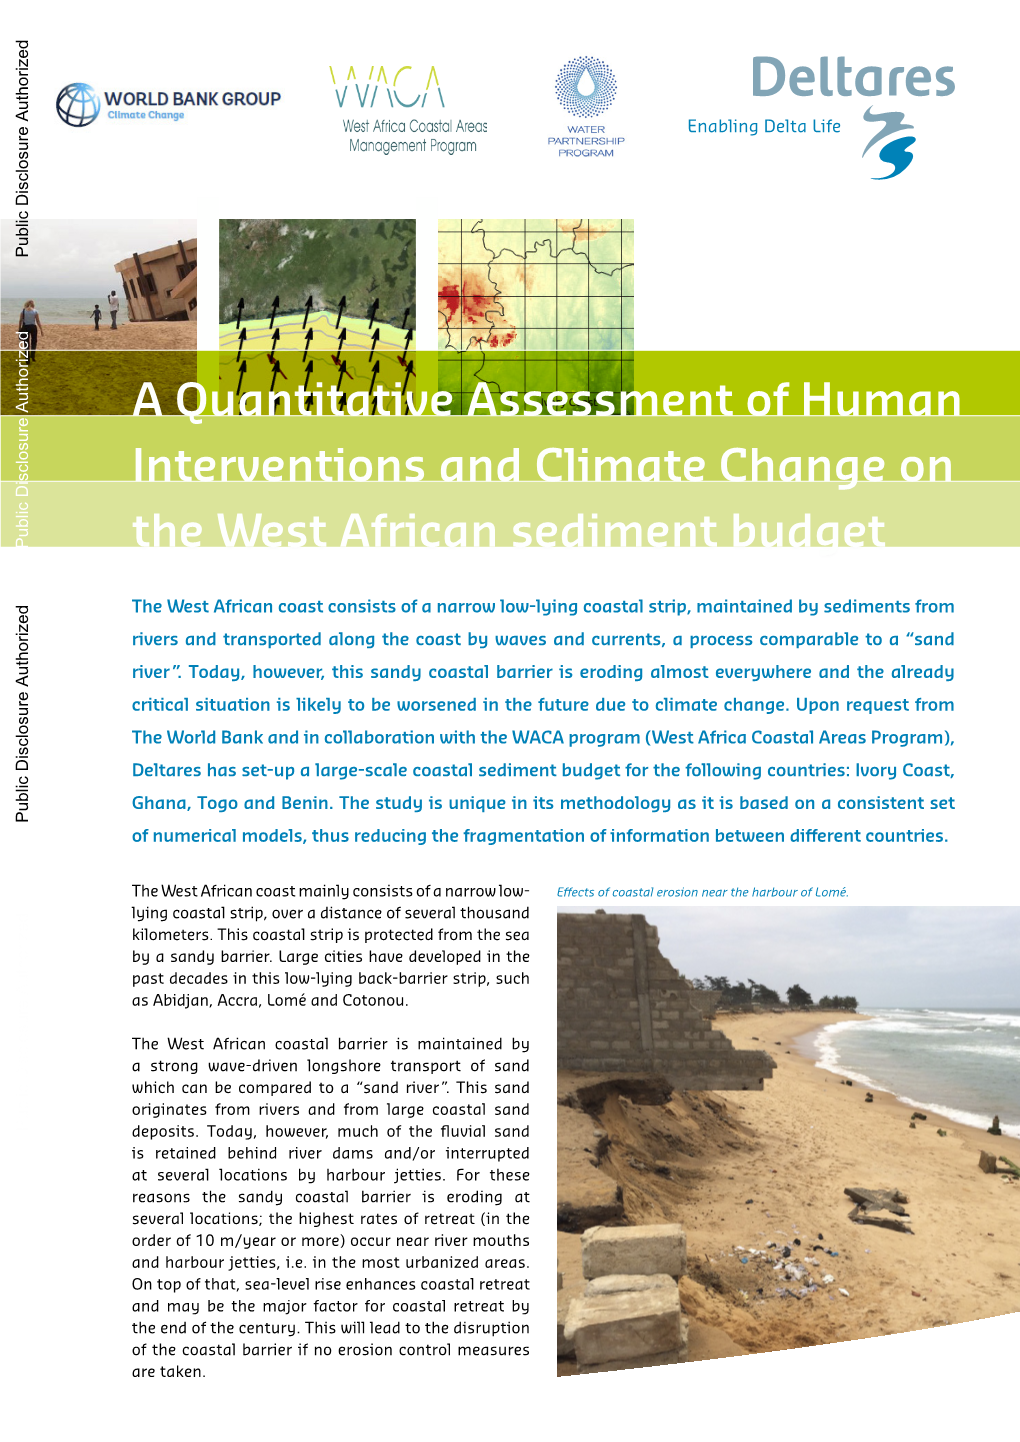 The West African Sediment Budget